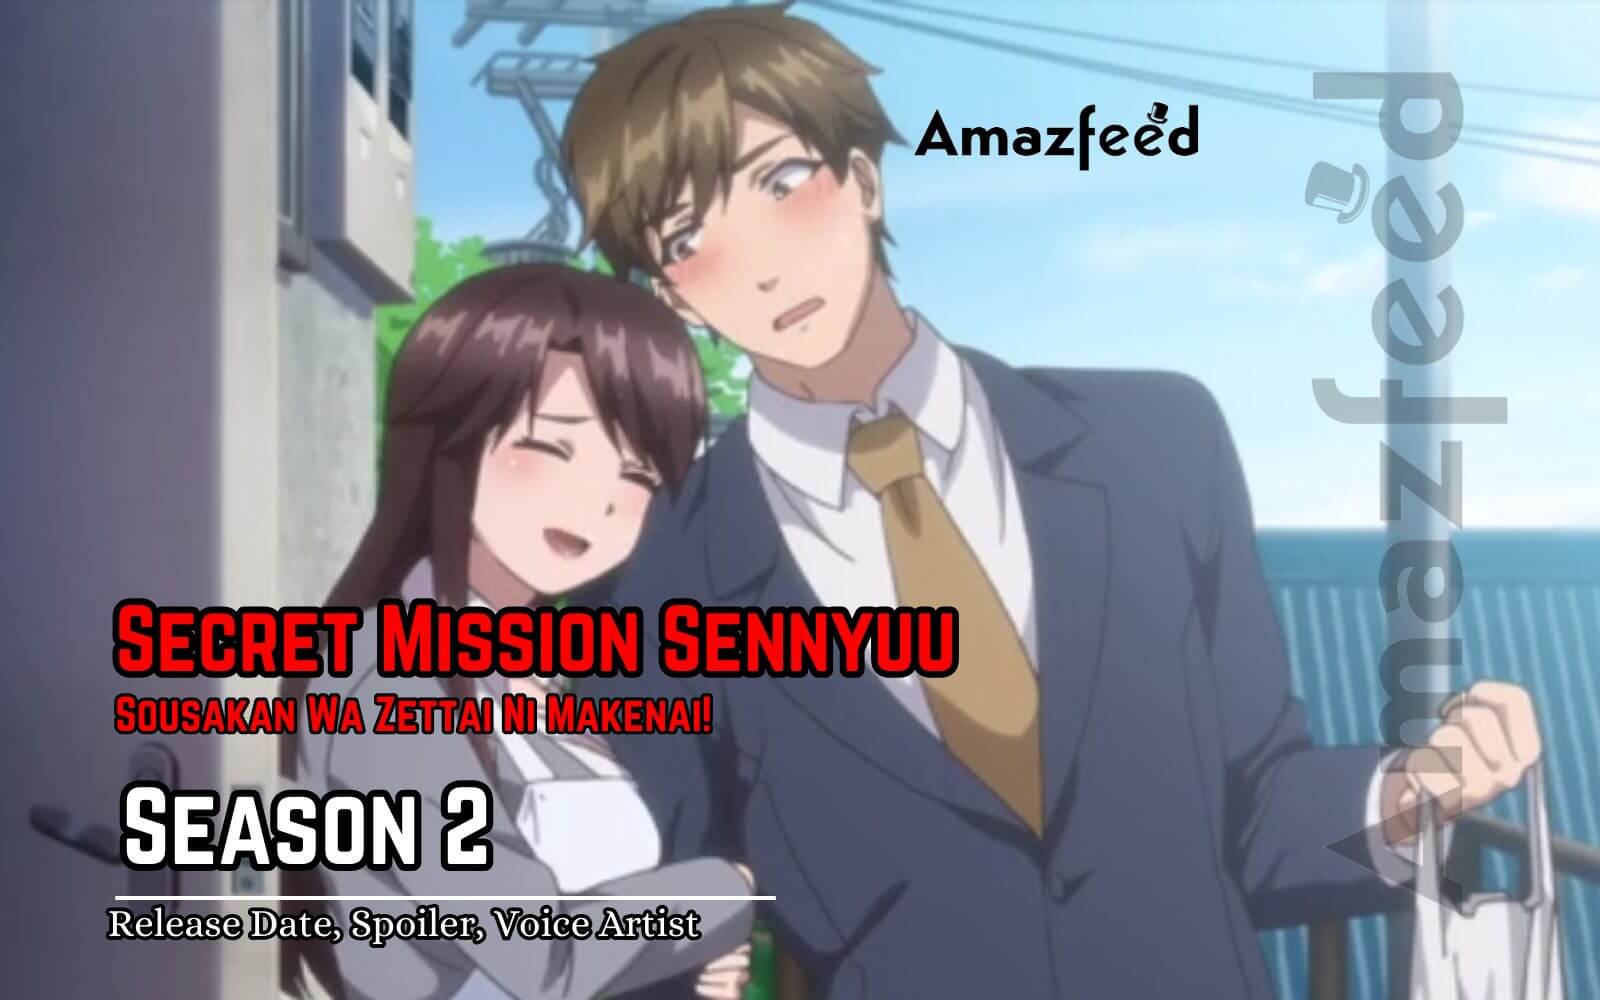 Update] The God of High School Season 2: Release Date, Cast, Spoilers,  Parental Guide, Review, Trailer– All We Know So Far » Amazfeed